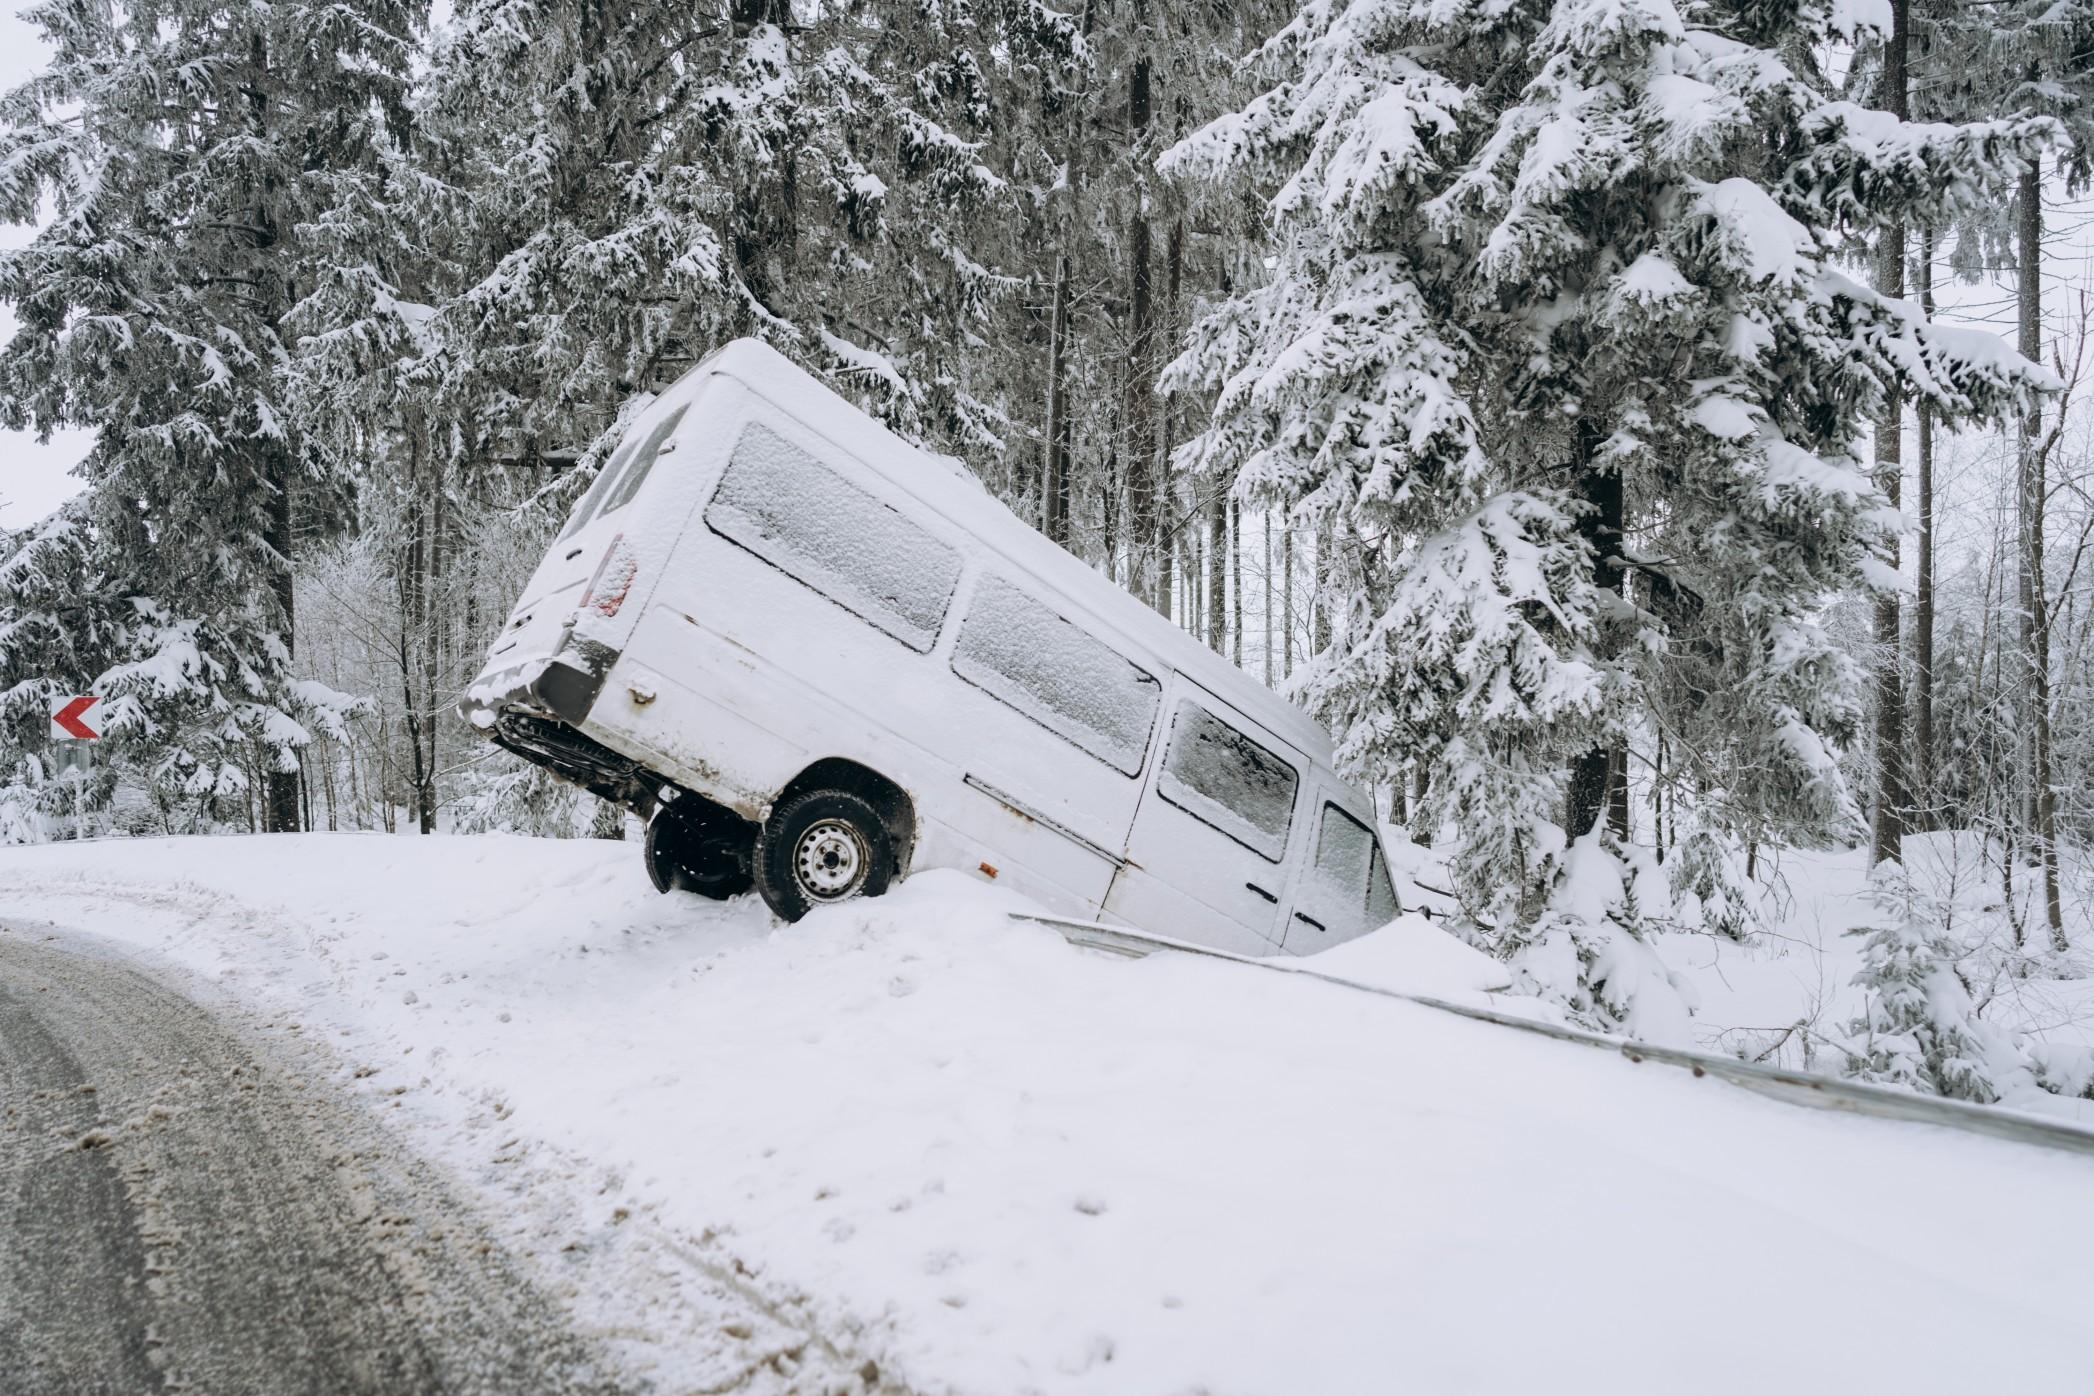 Winter driving conditions can be extremely dangerous.